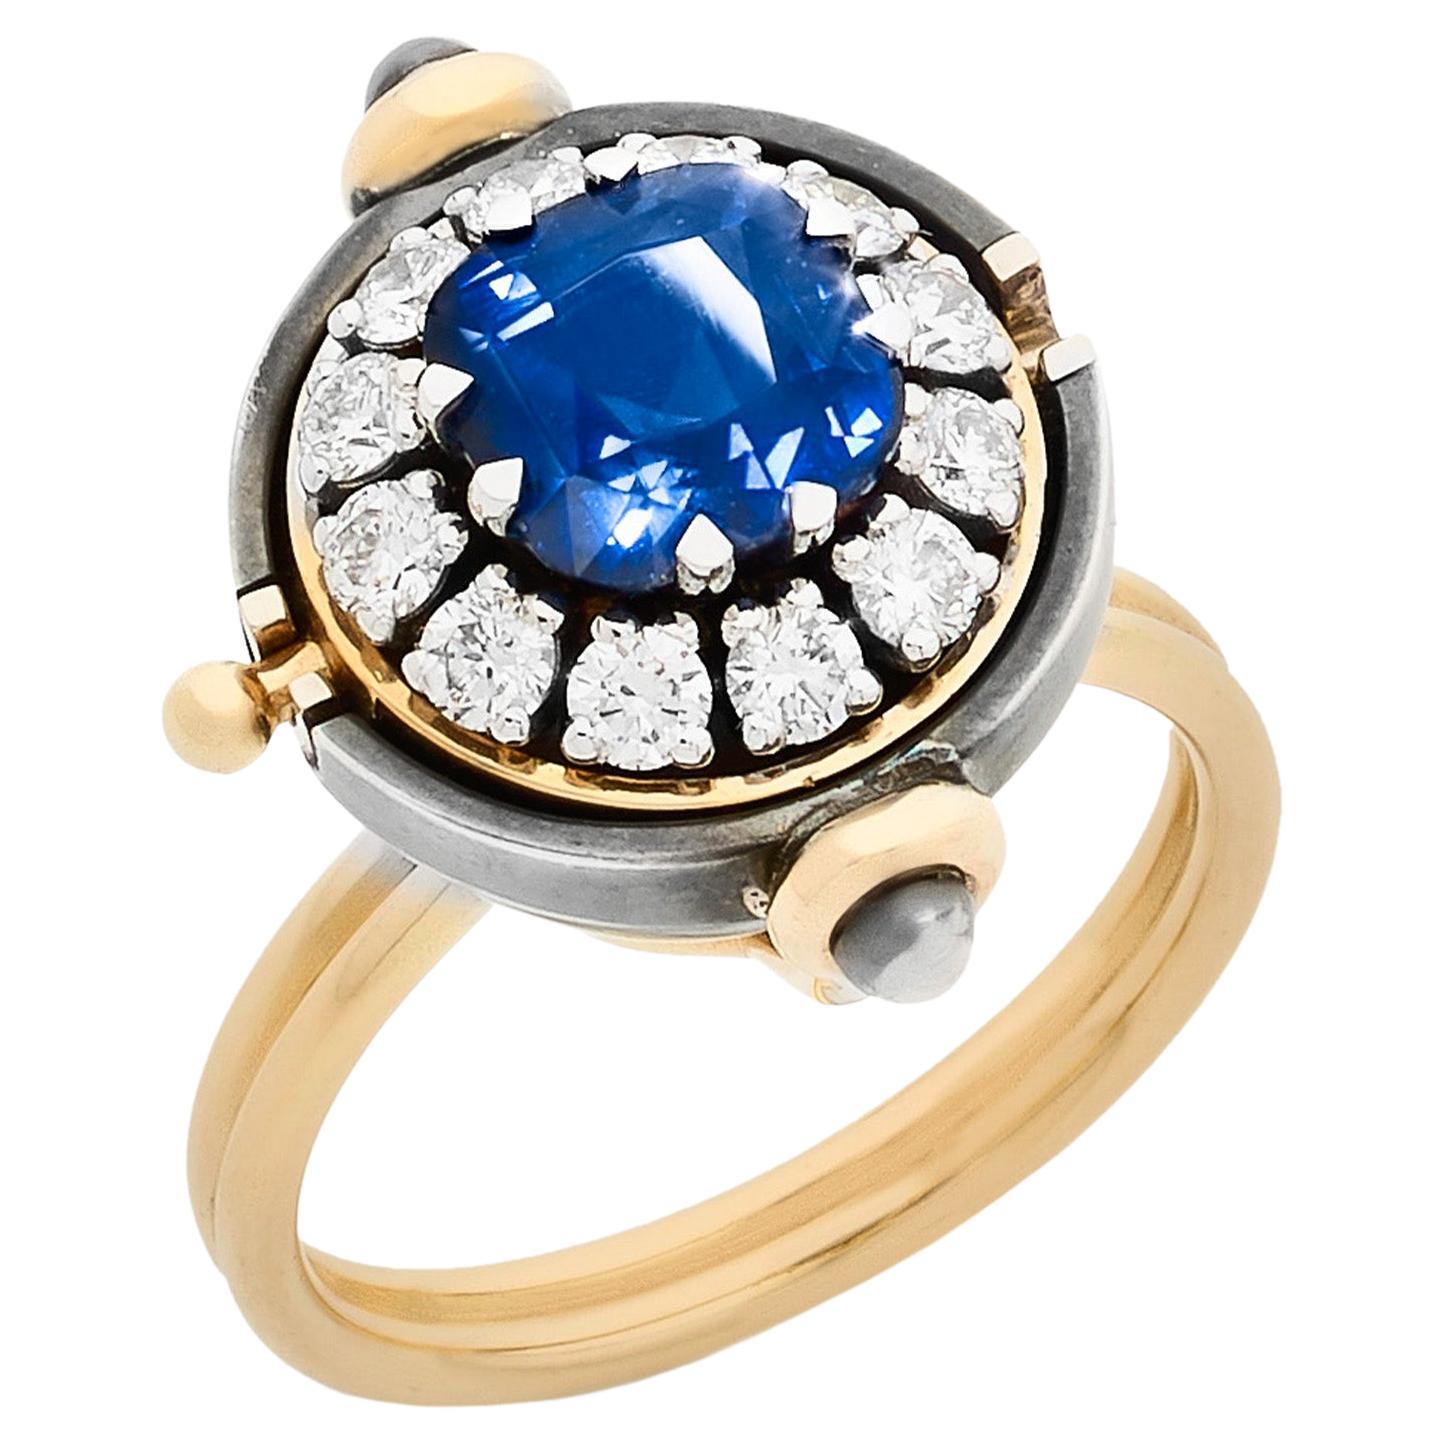 Medium Sapphire & Diamonds Sphere Ring in 18k Yellow Gold by Elie Top For Sale